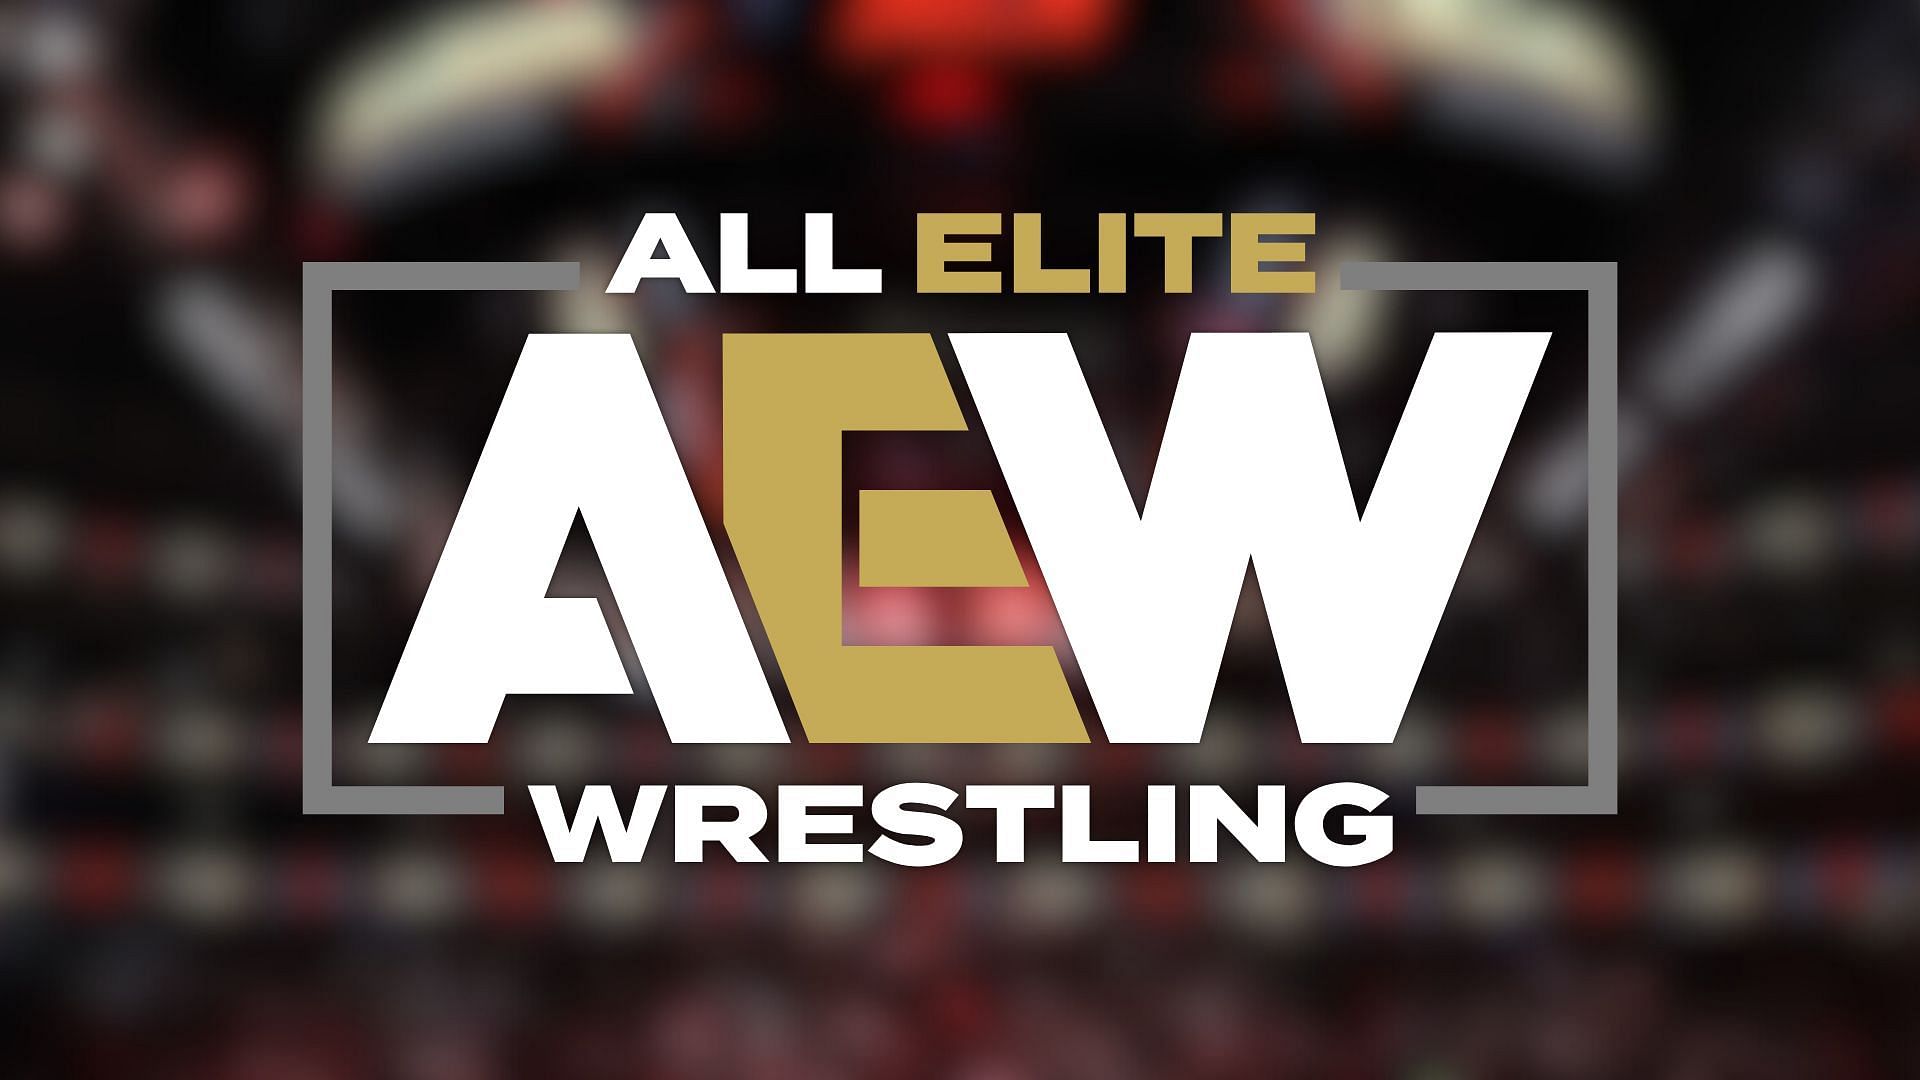 Which AEW manager thinks he is the best?